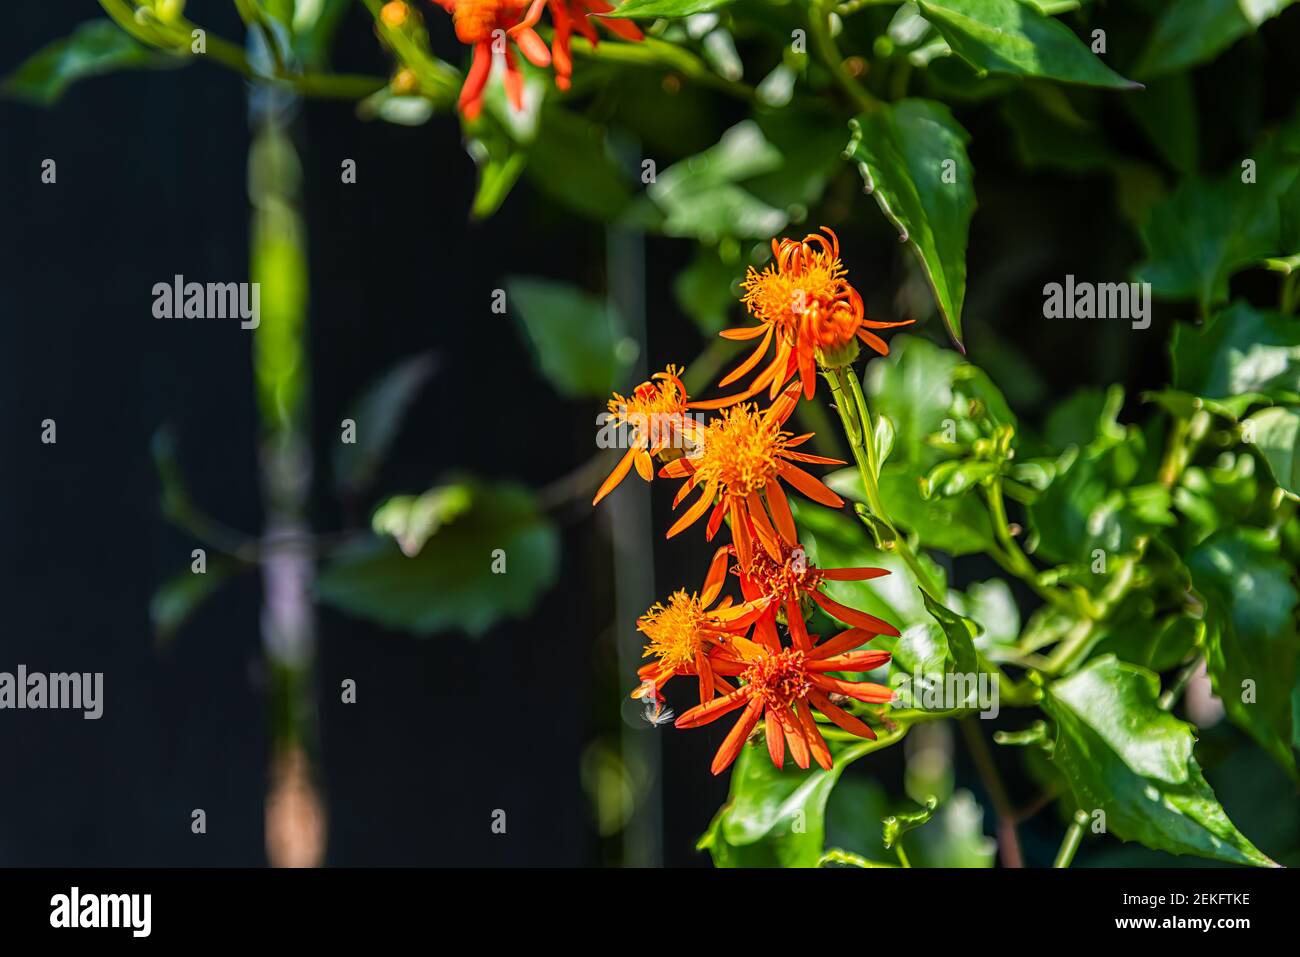 Pseudogynoxys chenopodioides Mexican flamevine blooming flowers in tropical garden of Key West, Florida Stock Photo